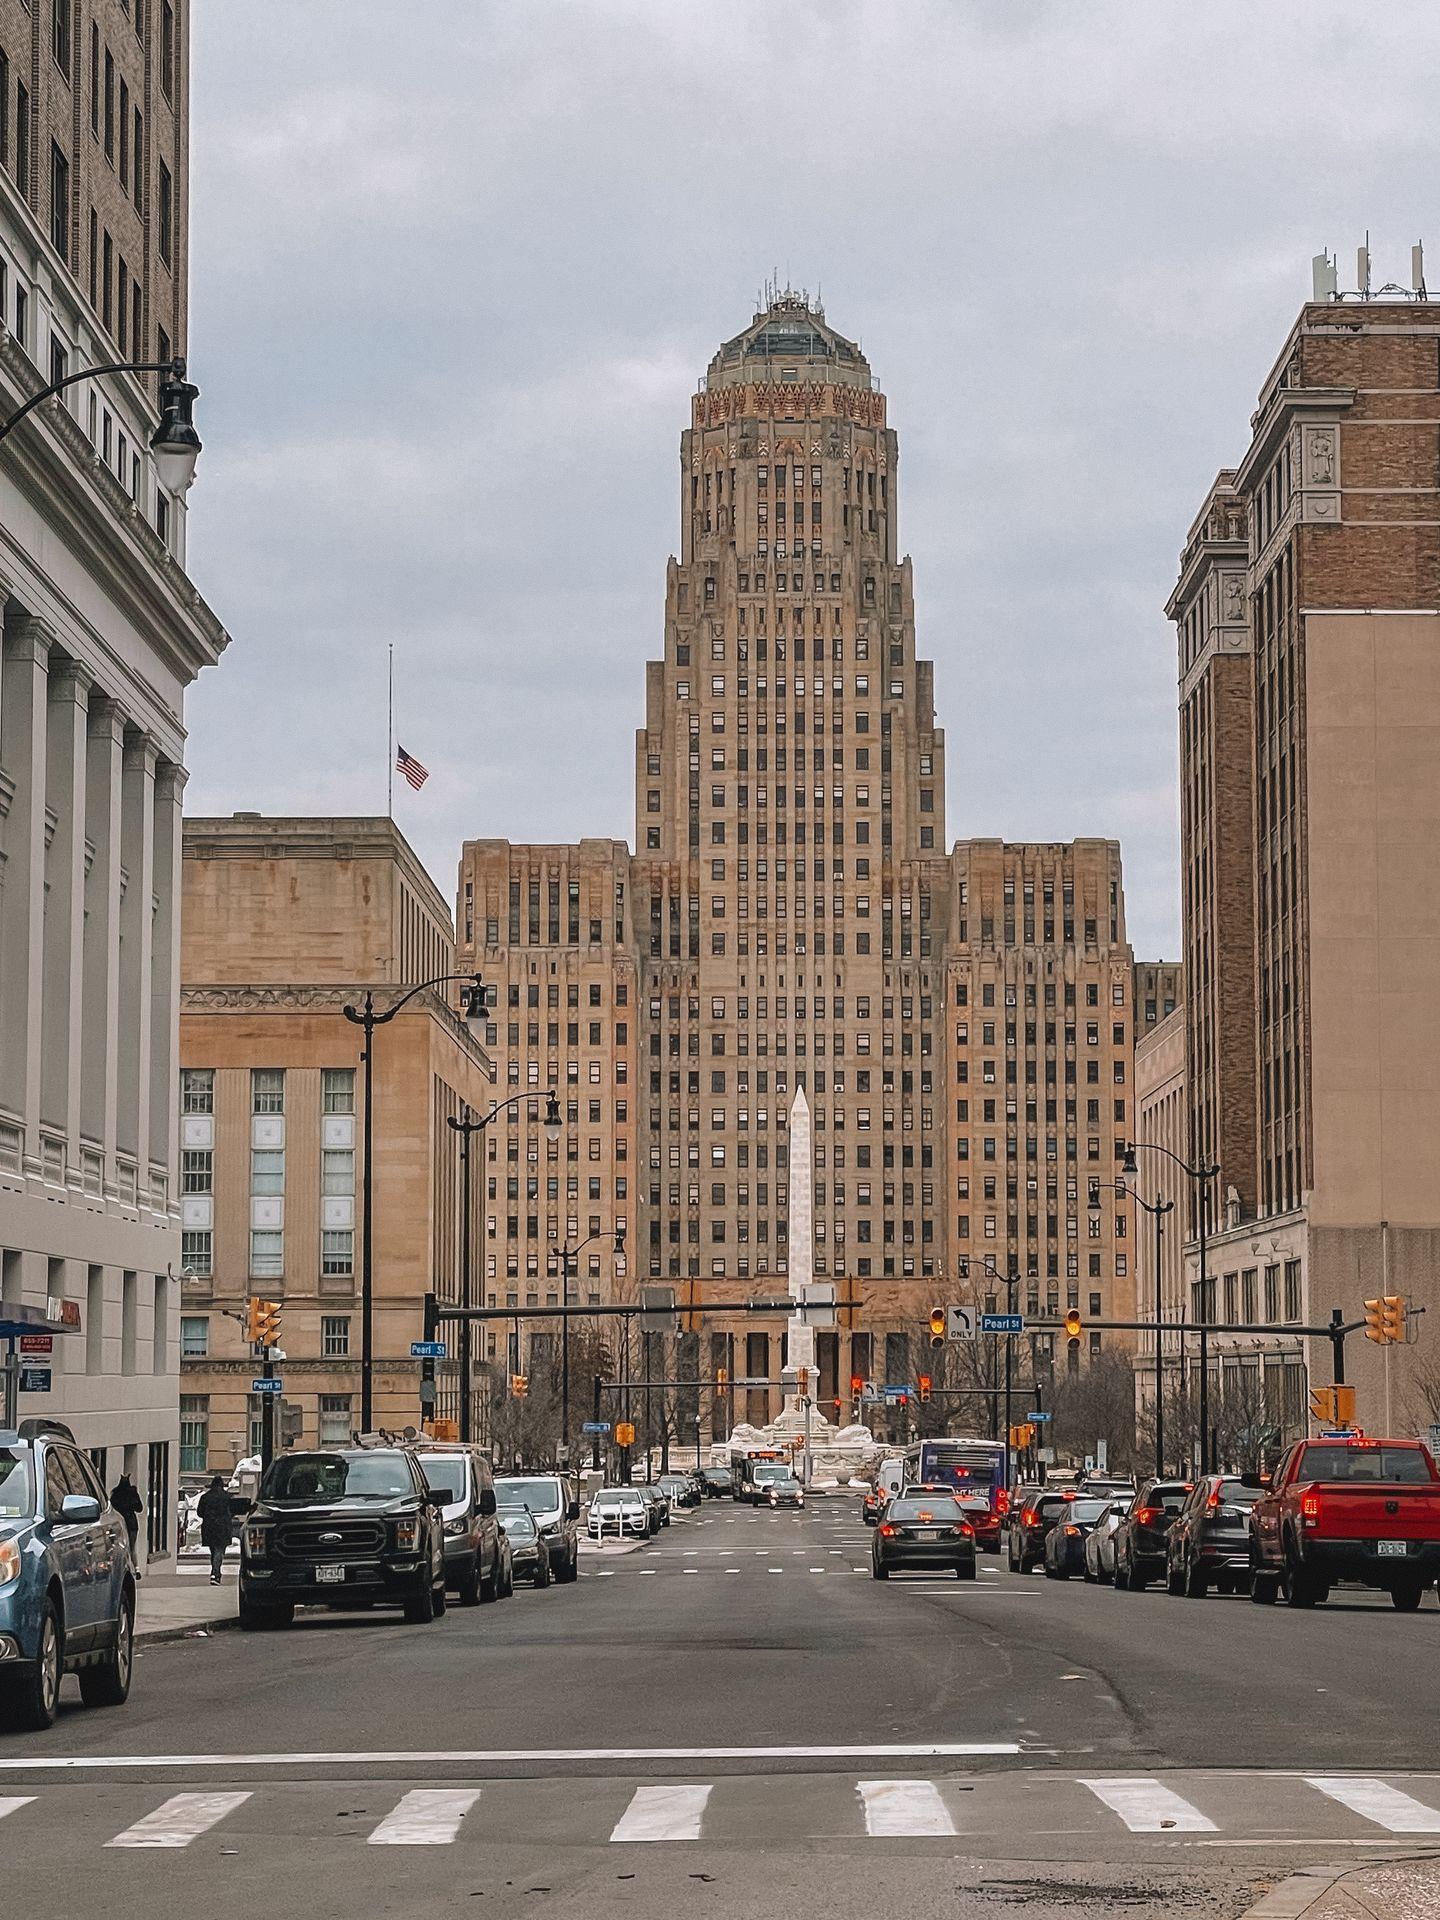 Looking down the street at a view of Buffalo City Hall, a tall building that is light brown in color. A tall white pillar is outside of the building in the center.